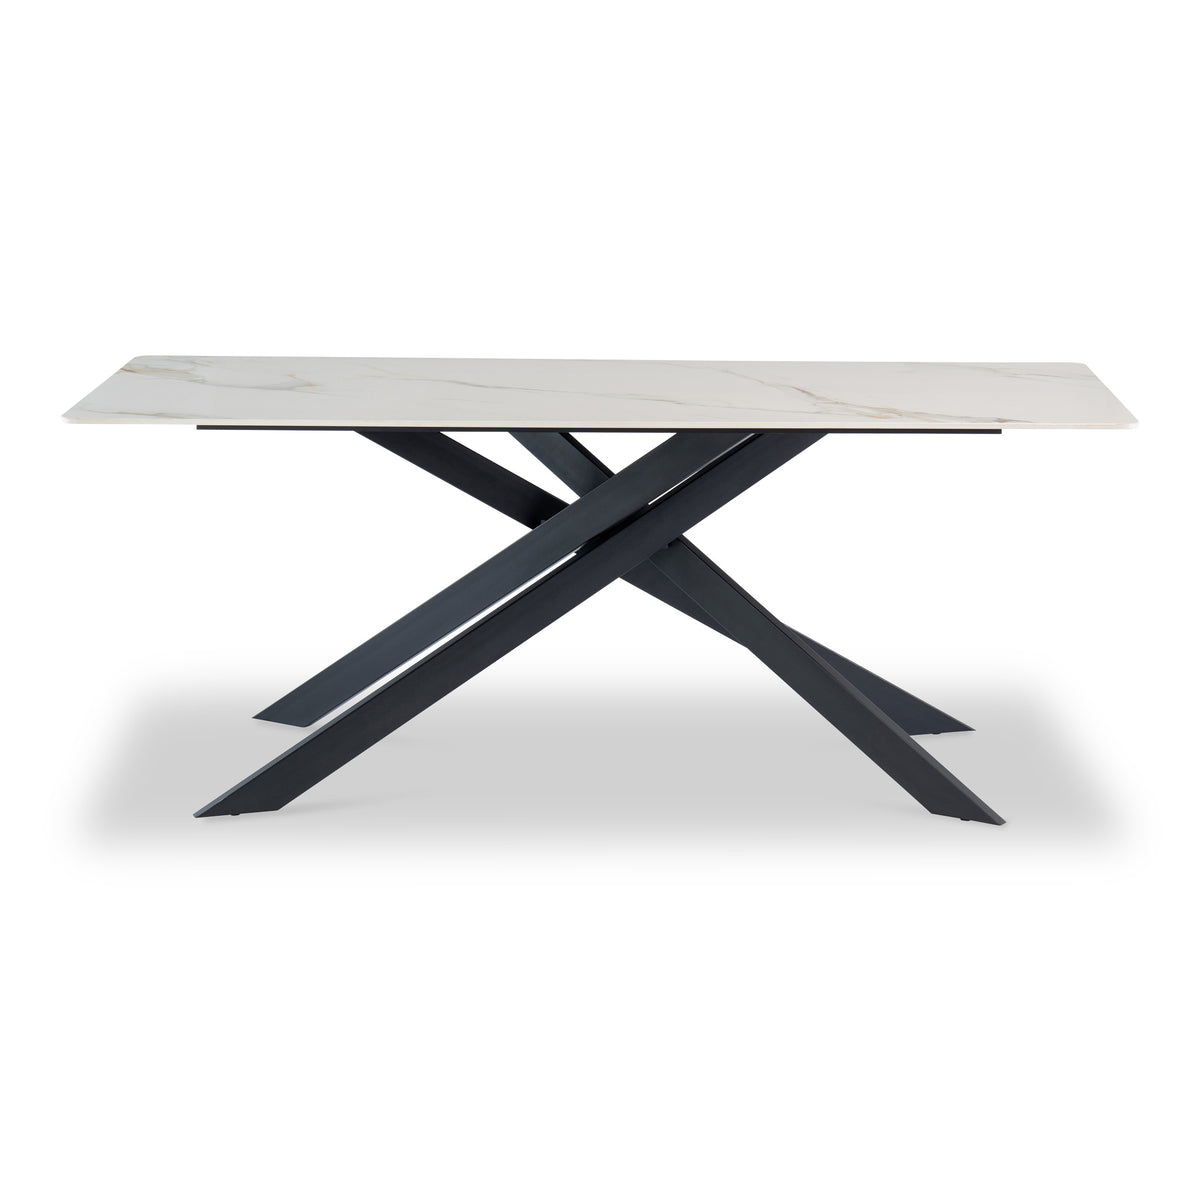 Casey White & Gold Sintered Stone 200cm Dining Table from roseland